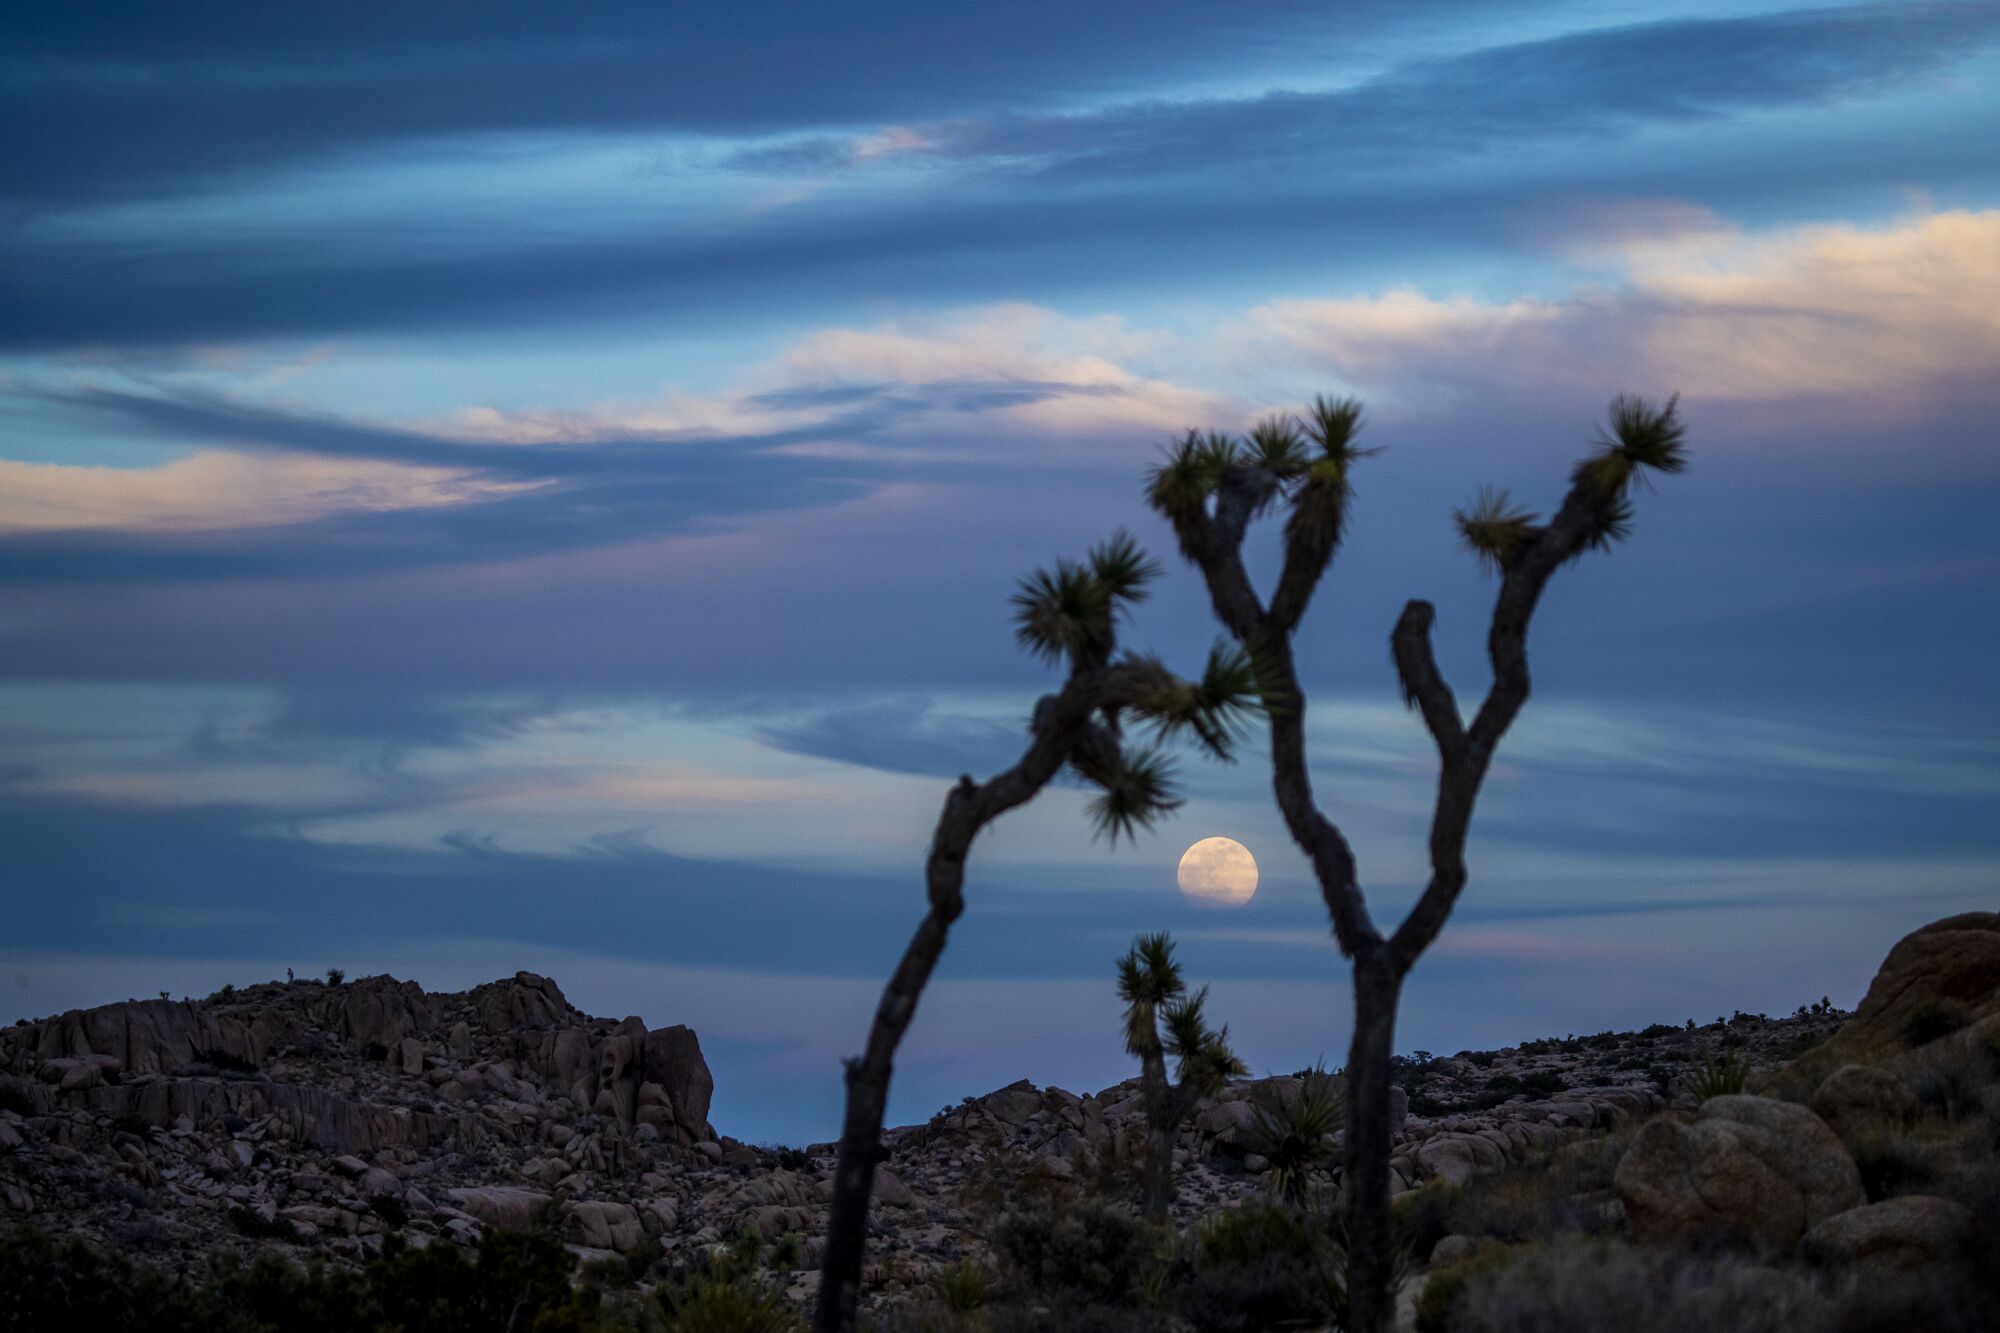 Clouds and Joshua trees frame the view of the super flower blood moon rising above Joshua Tree National Park.